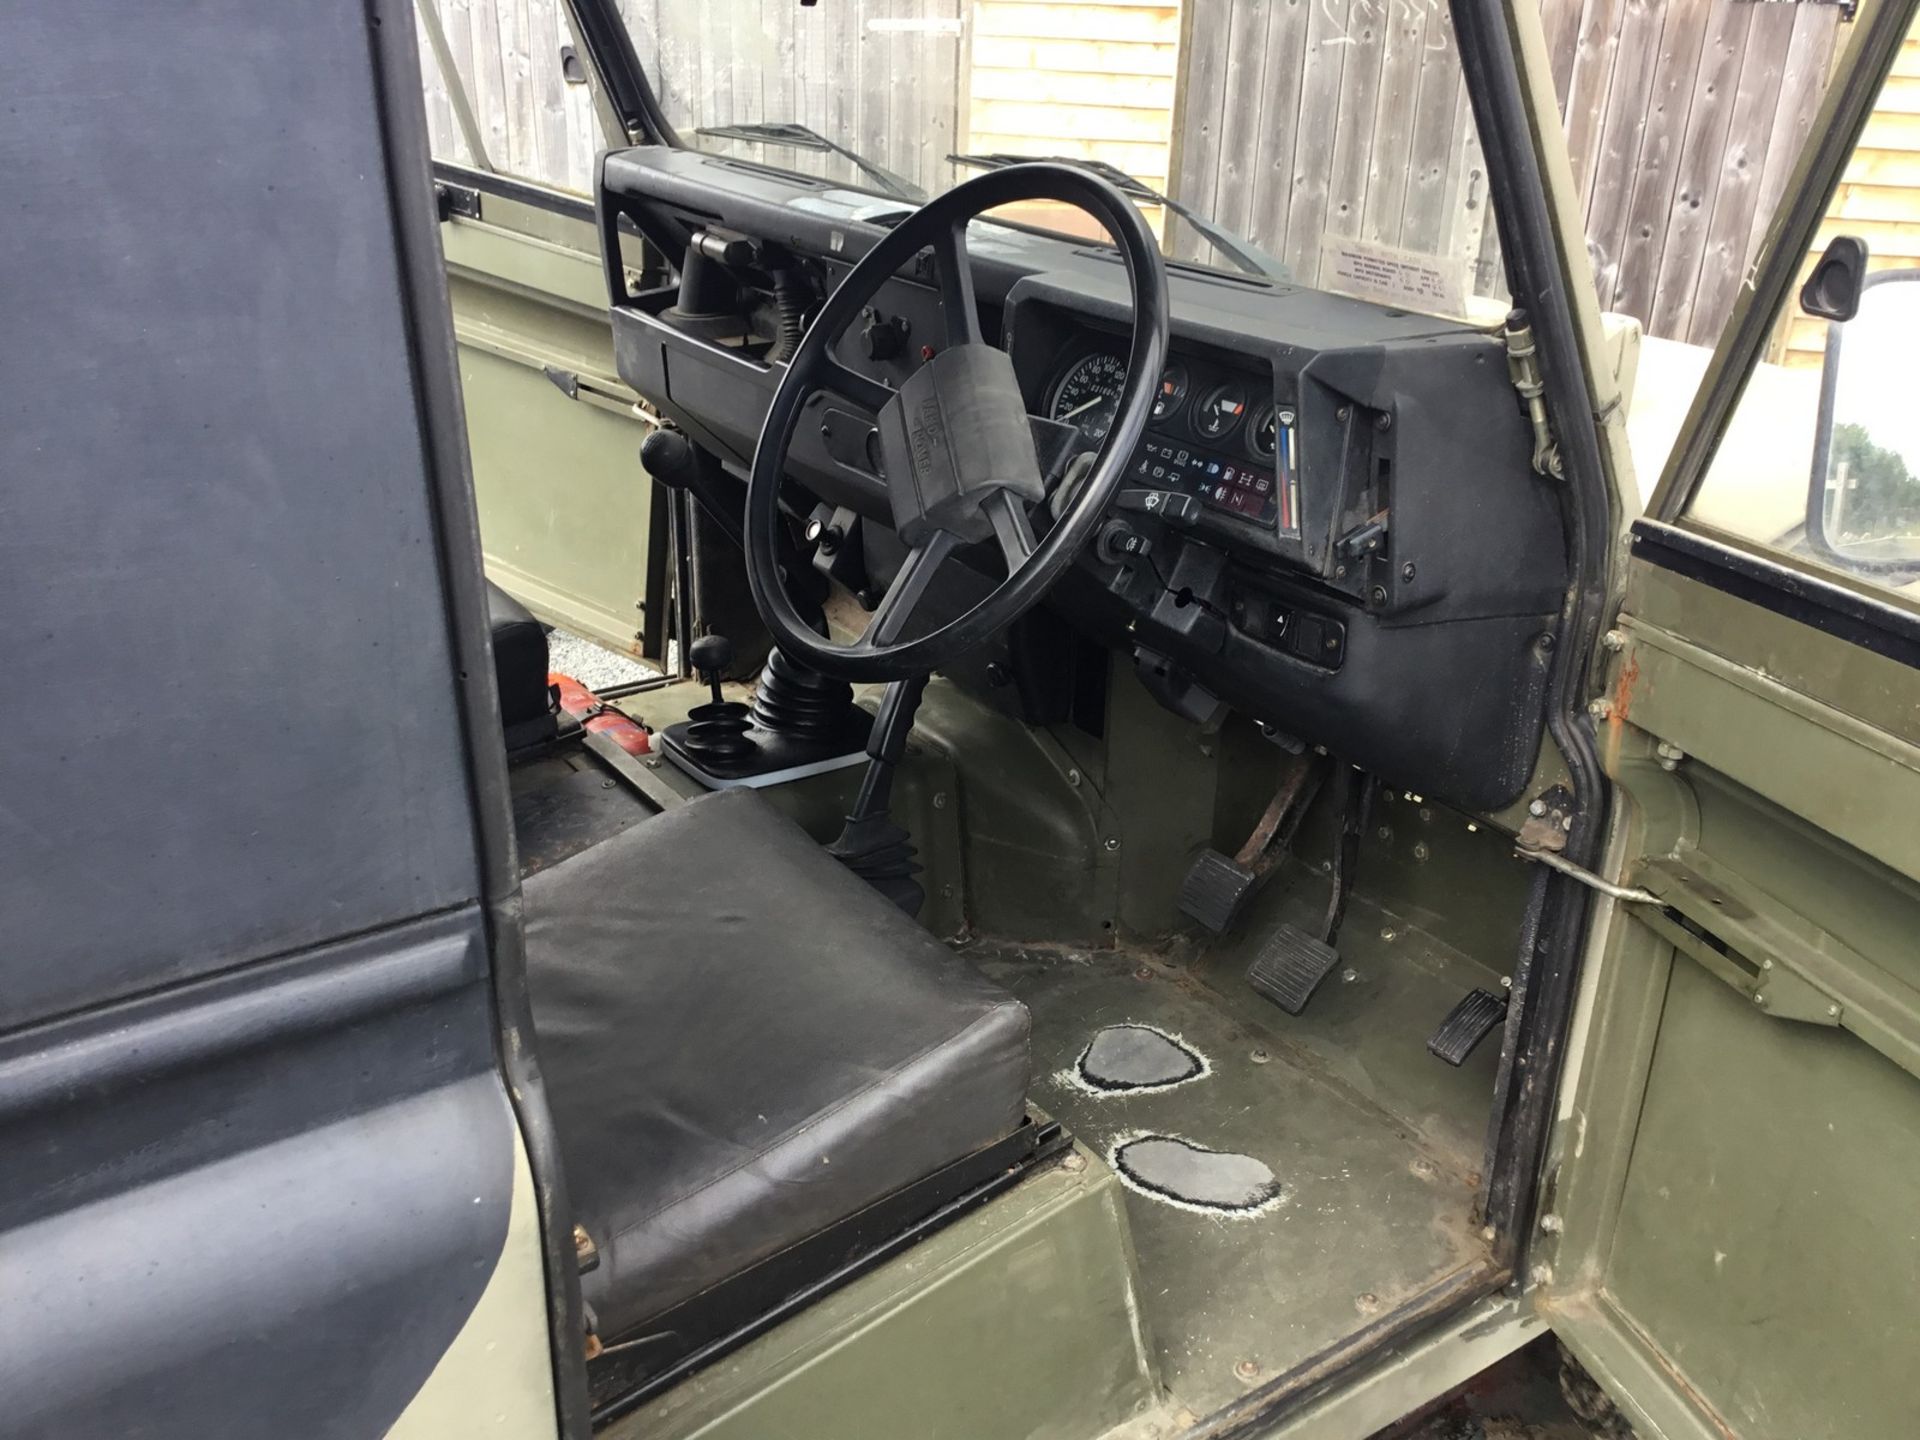 1990 Land Rover 110 Reg. no. Unregistered Chassis no. SALLDHAC7FA407380 Engine no. Unknown This - Image 3 of 6